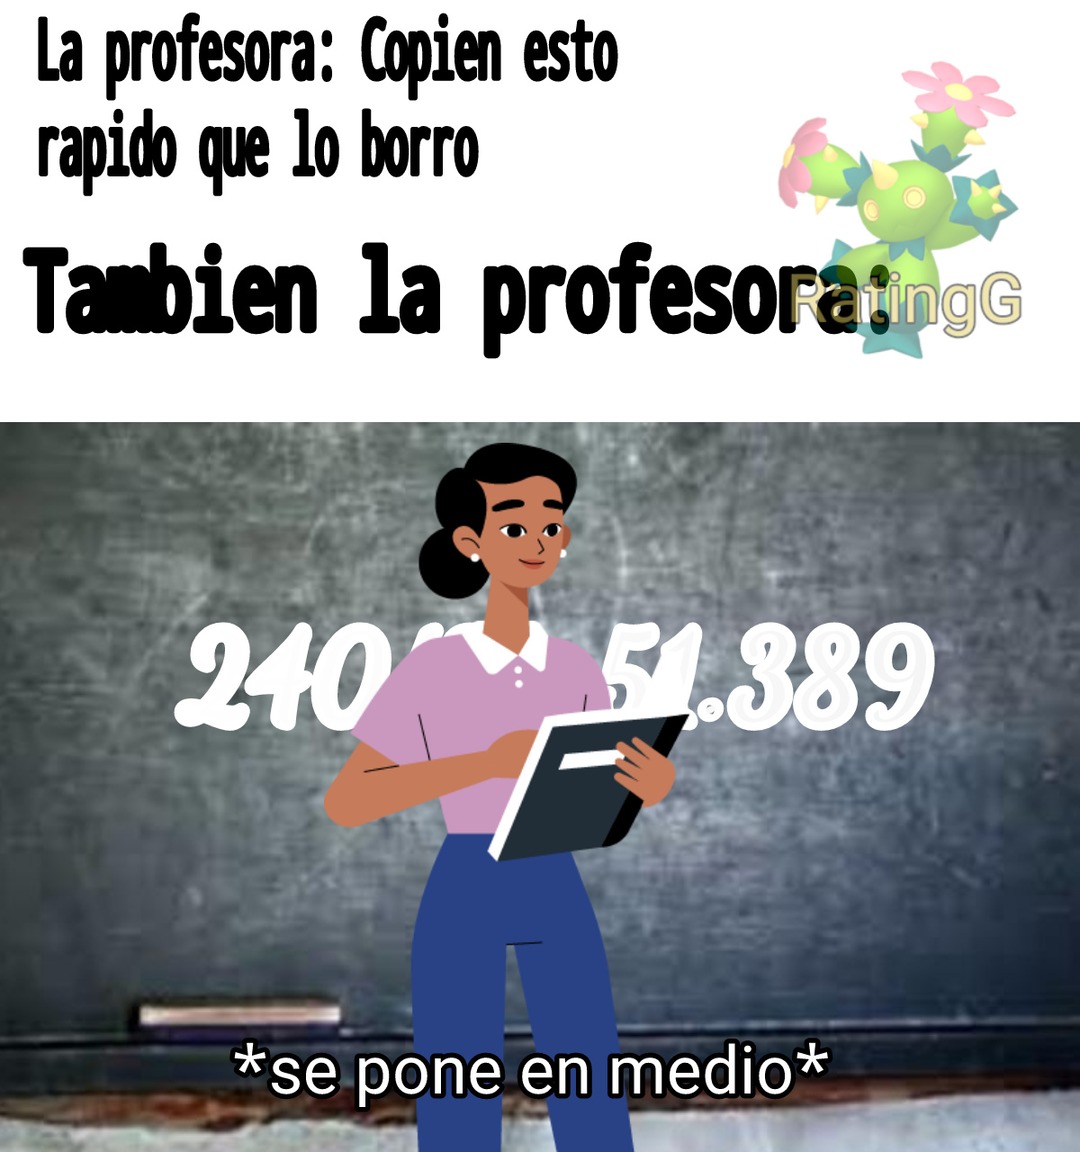 Profe, usted no es invisible - meme